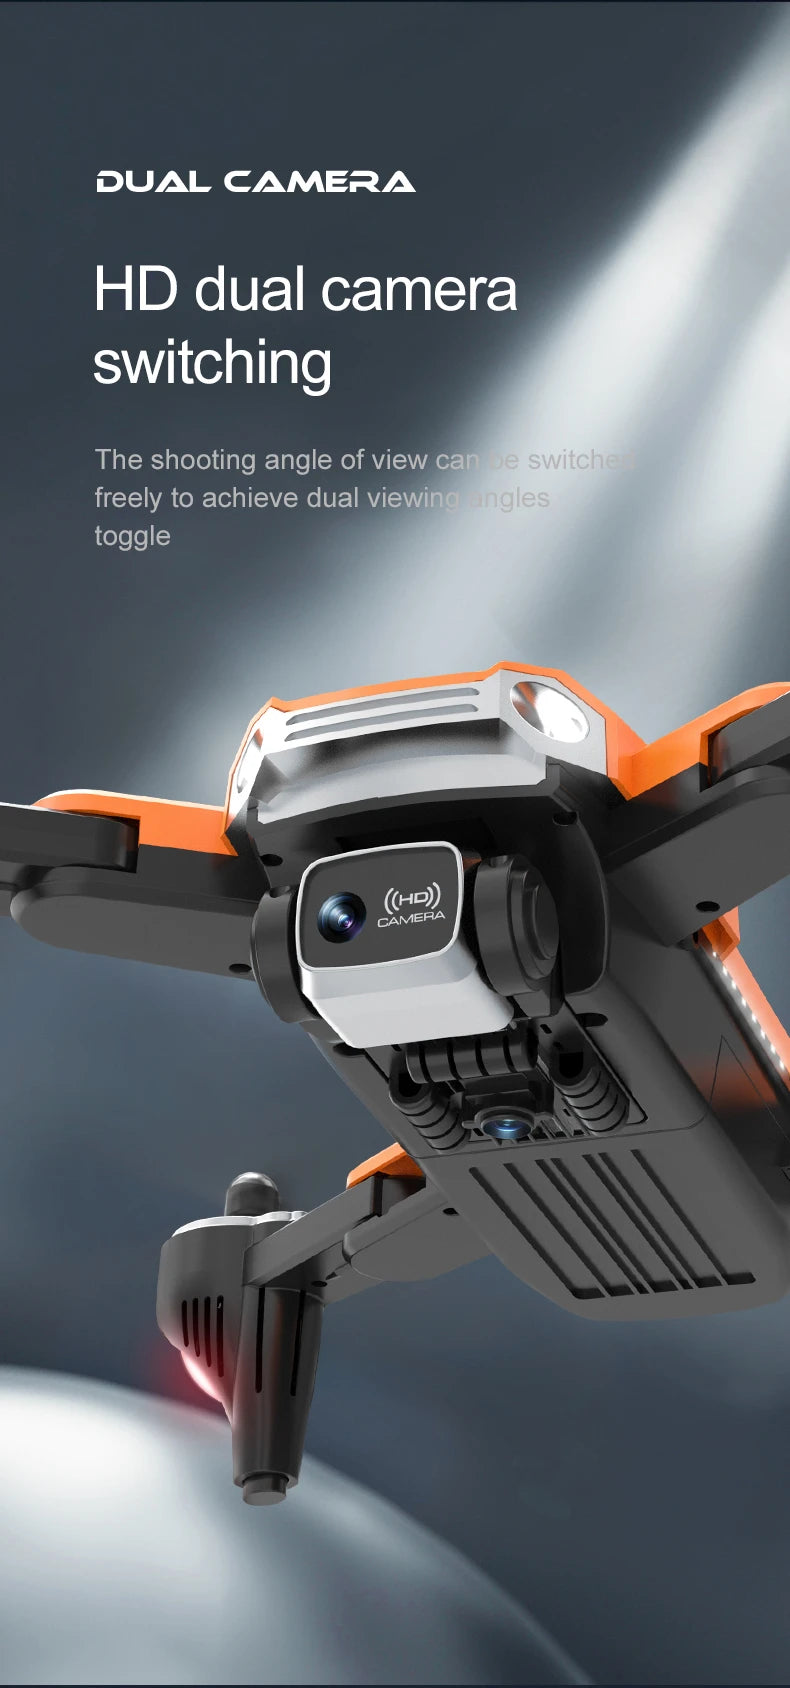 S8 Drone, dual camera hd dual camera switching the shooting angle of view can